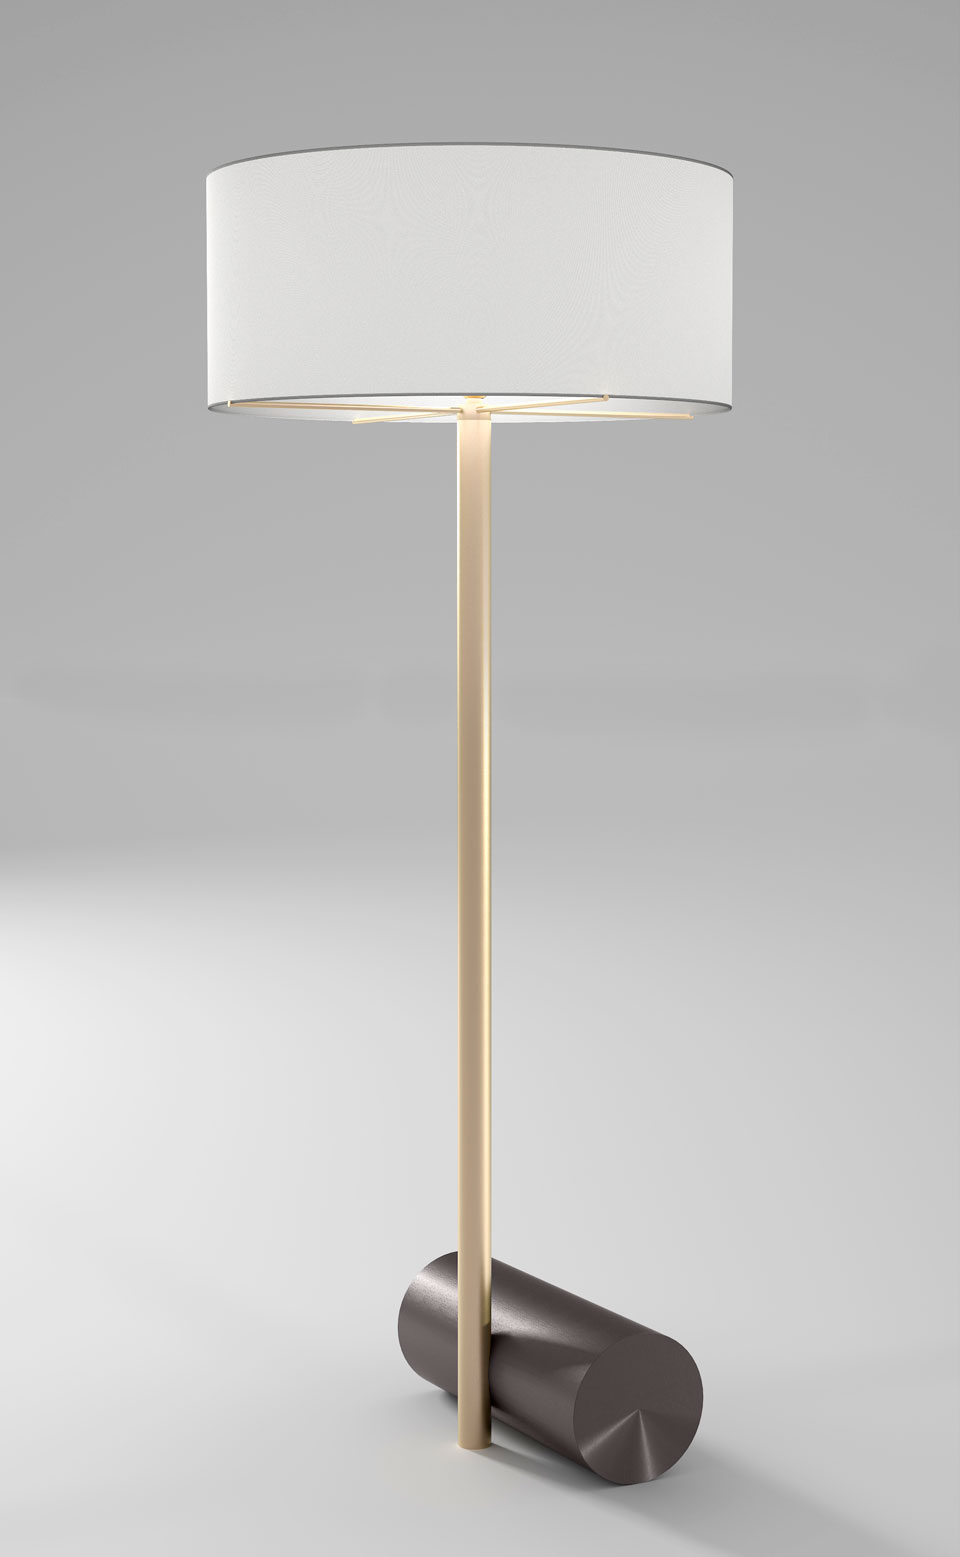 Cale Floor Lamp Graphite Base Satin Brass Foot And Cylindrical Shade In White Percaline Dimmer pertaining to sizing 960 X 1557